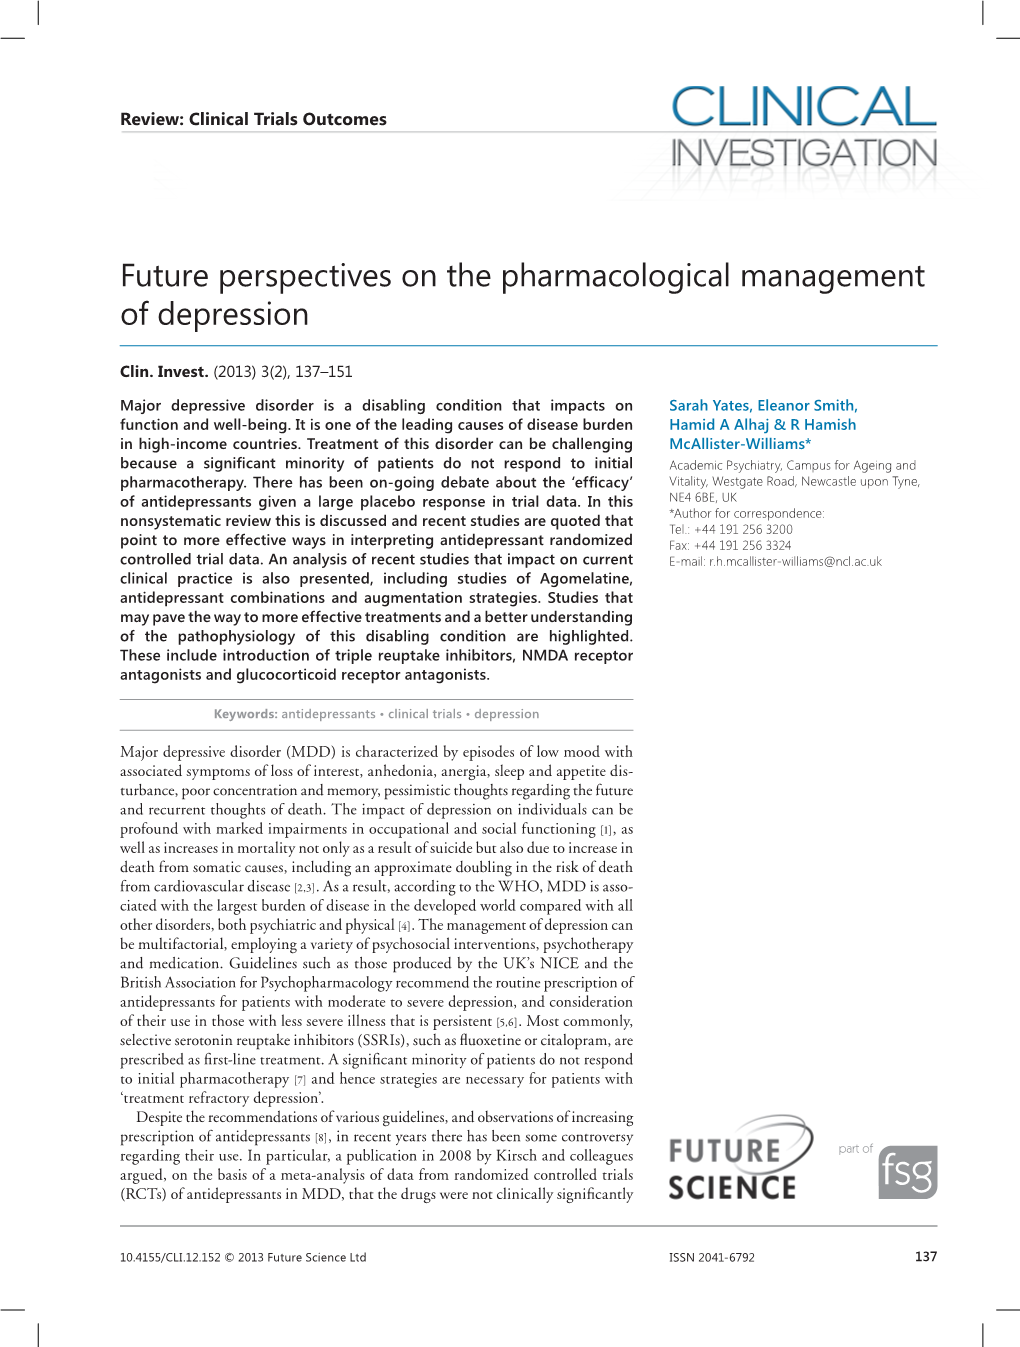 Future Perspectives on the Pharmacological Management of Depression